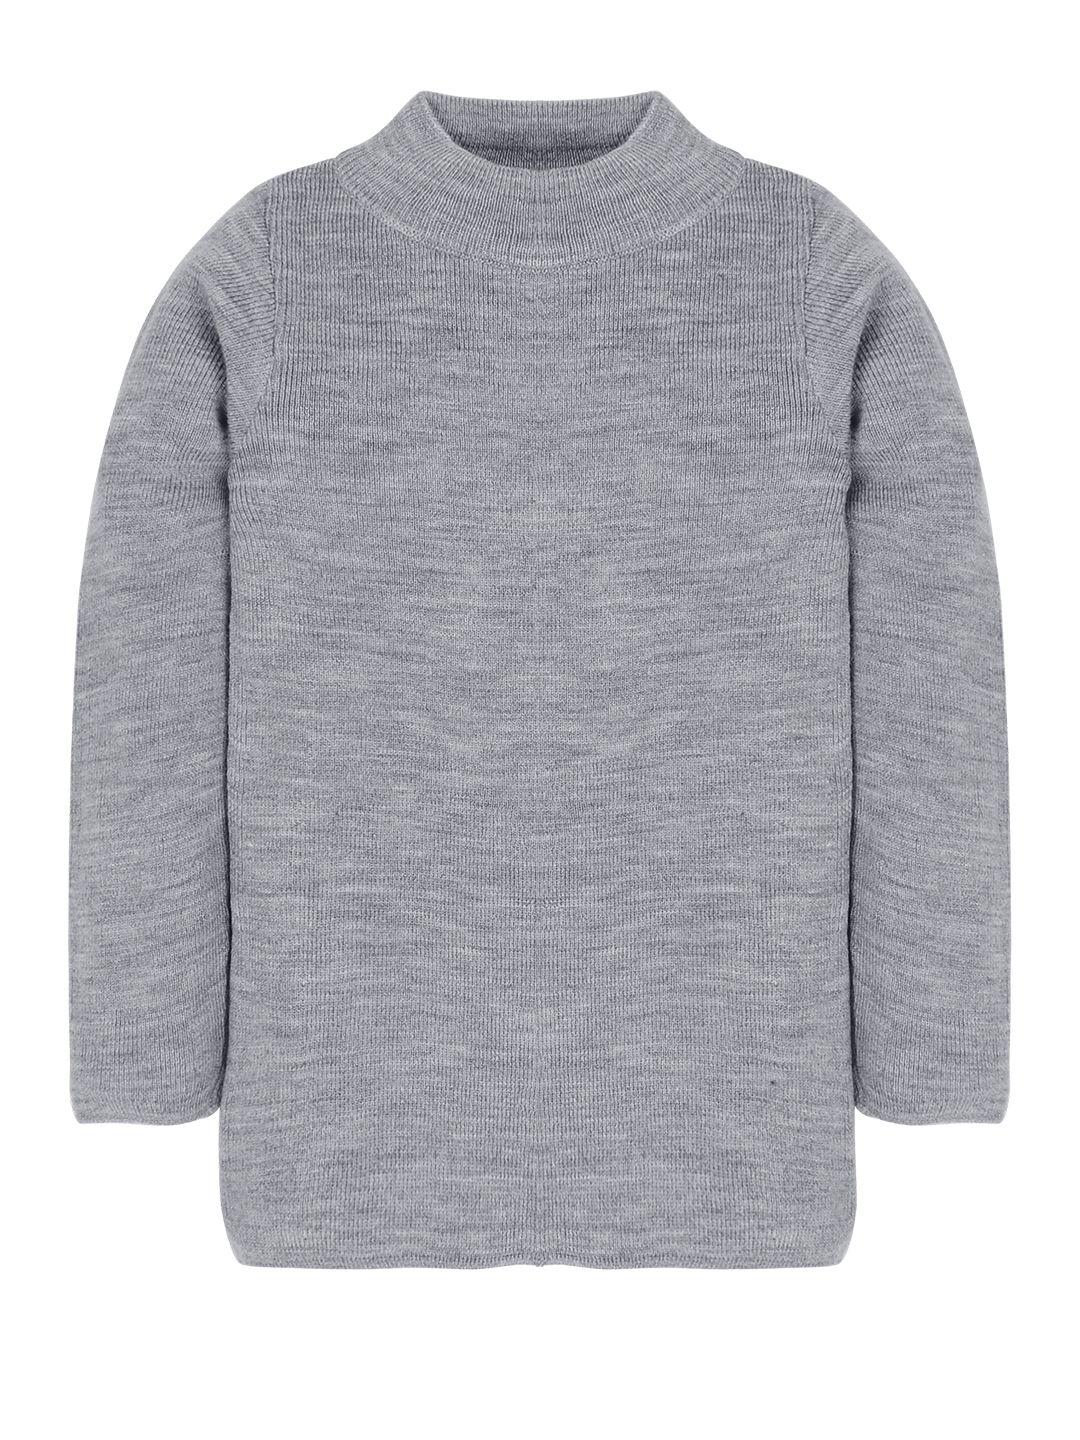 rvk kids grey solid pullover sweater